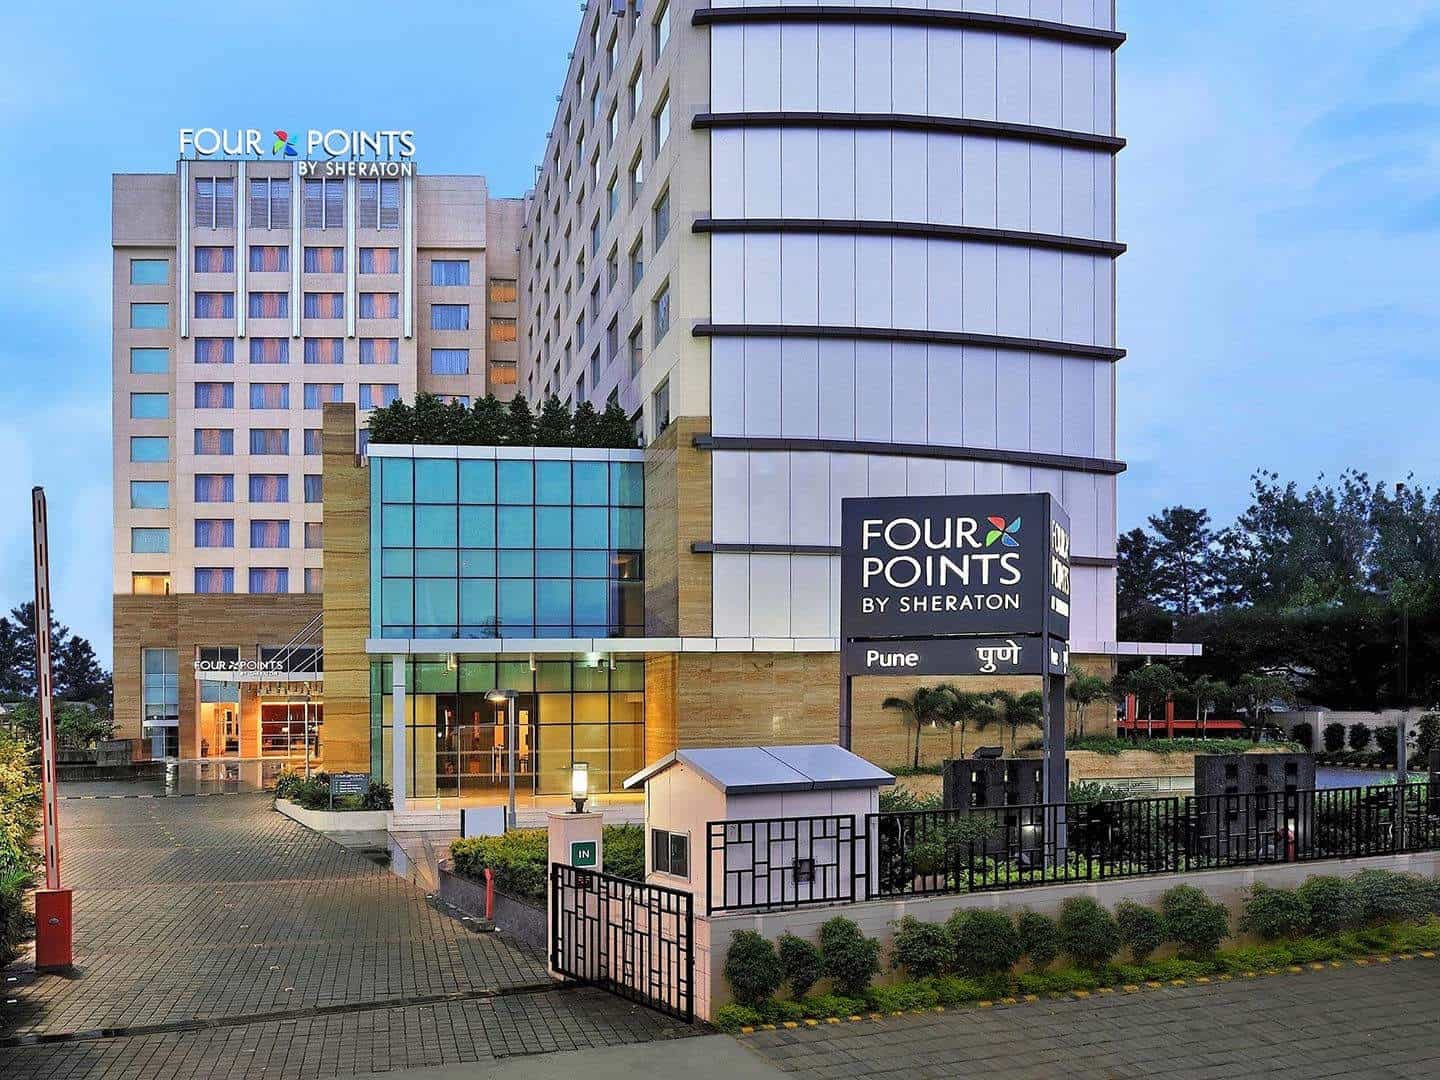 four and five star hotels near me